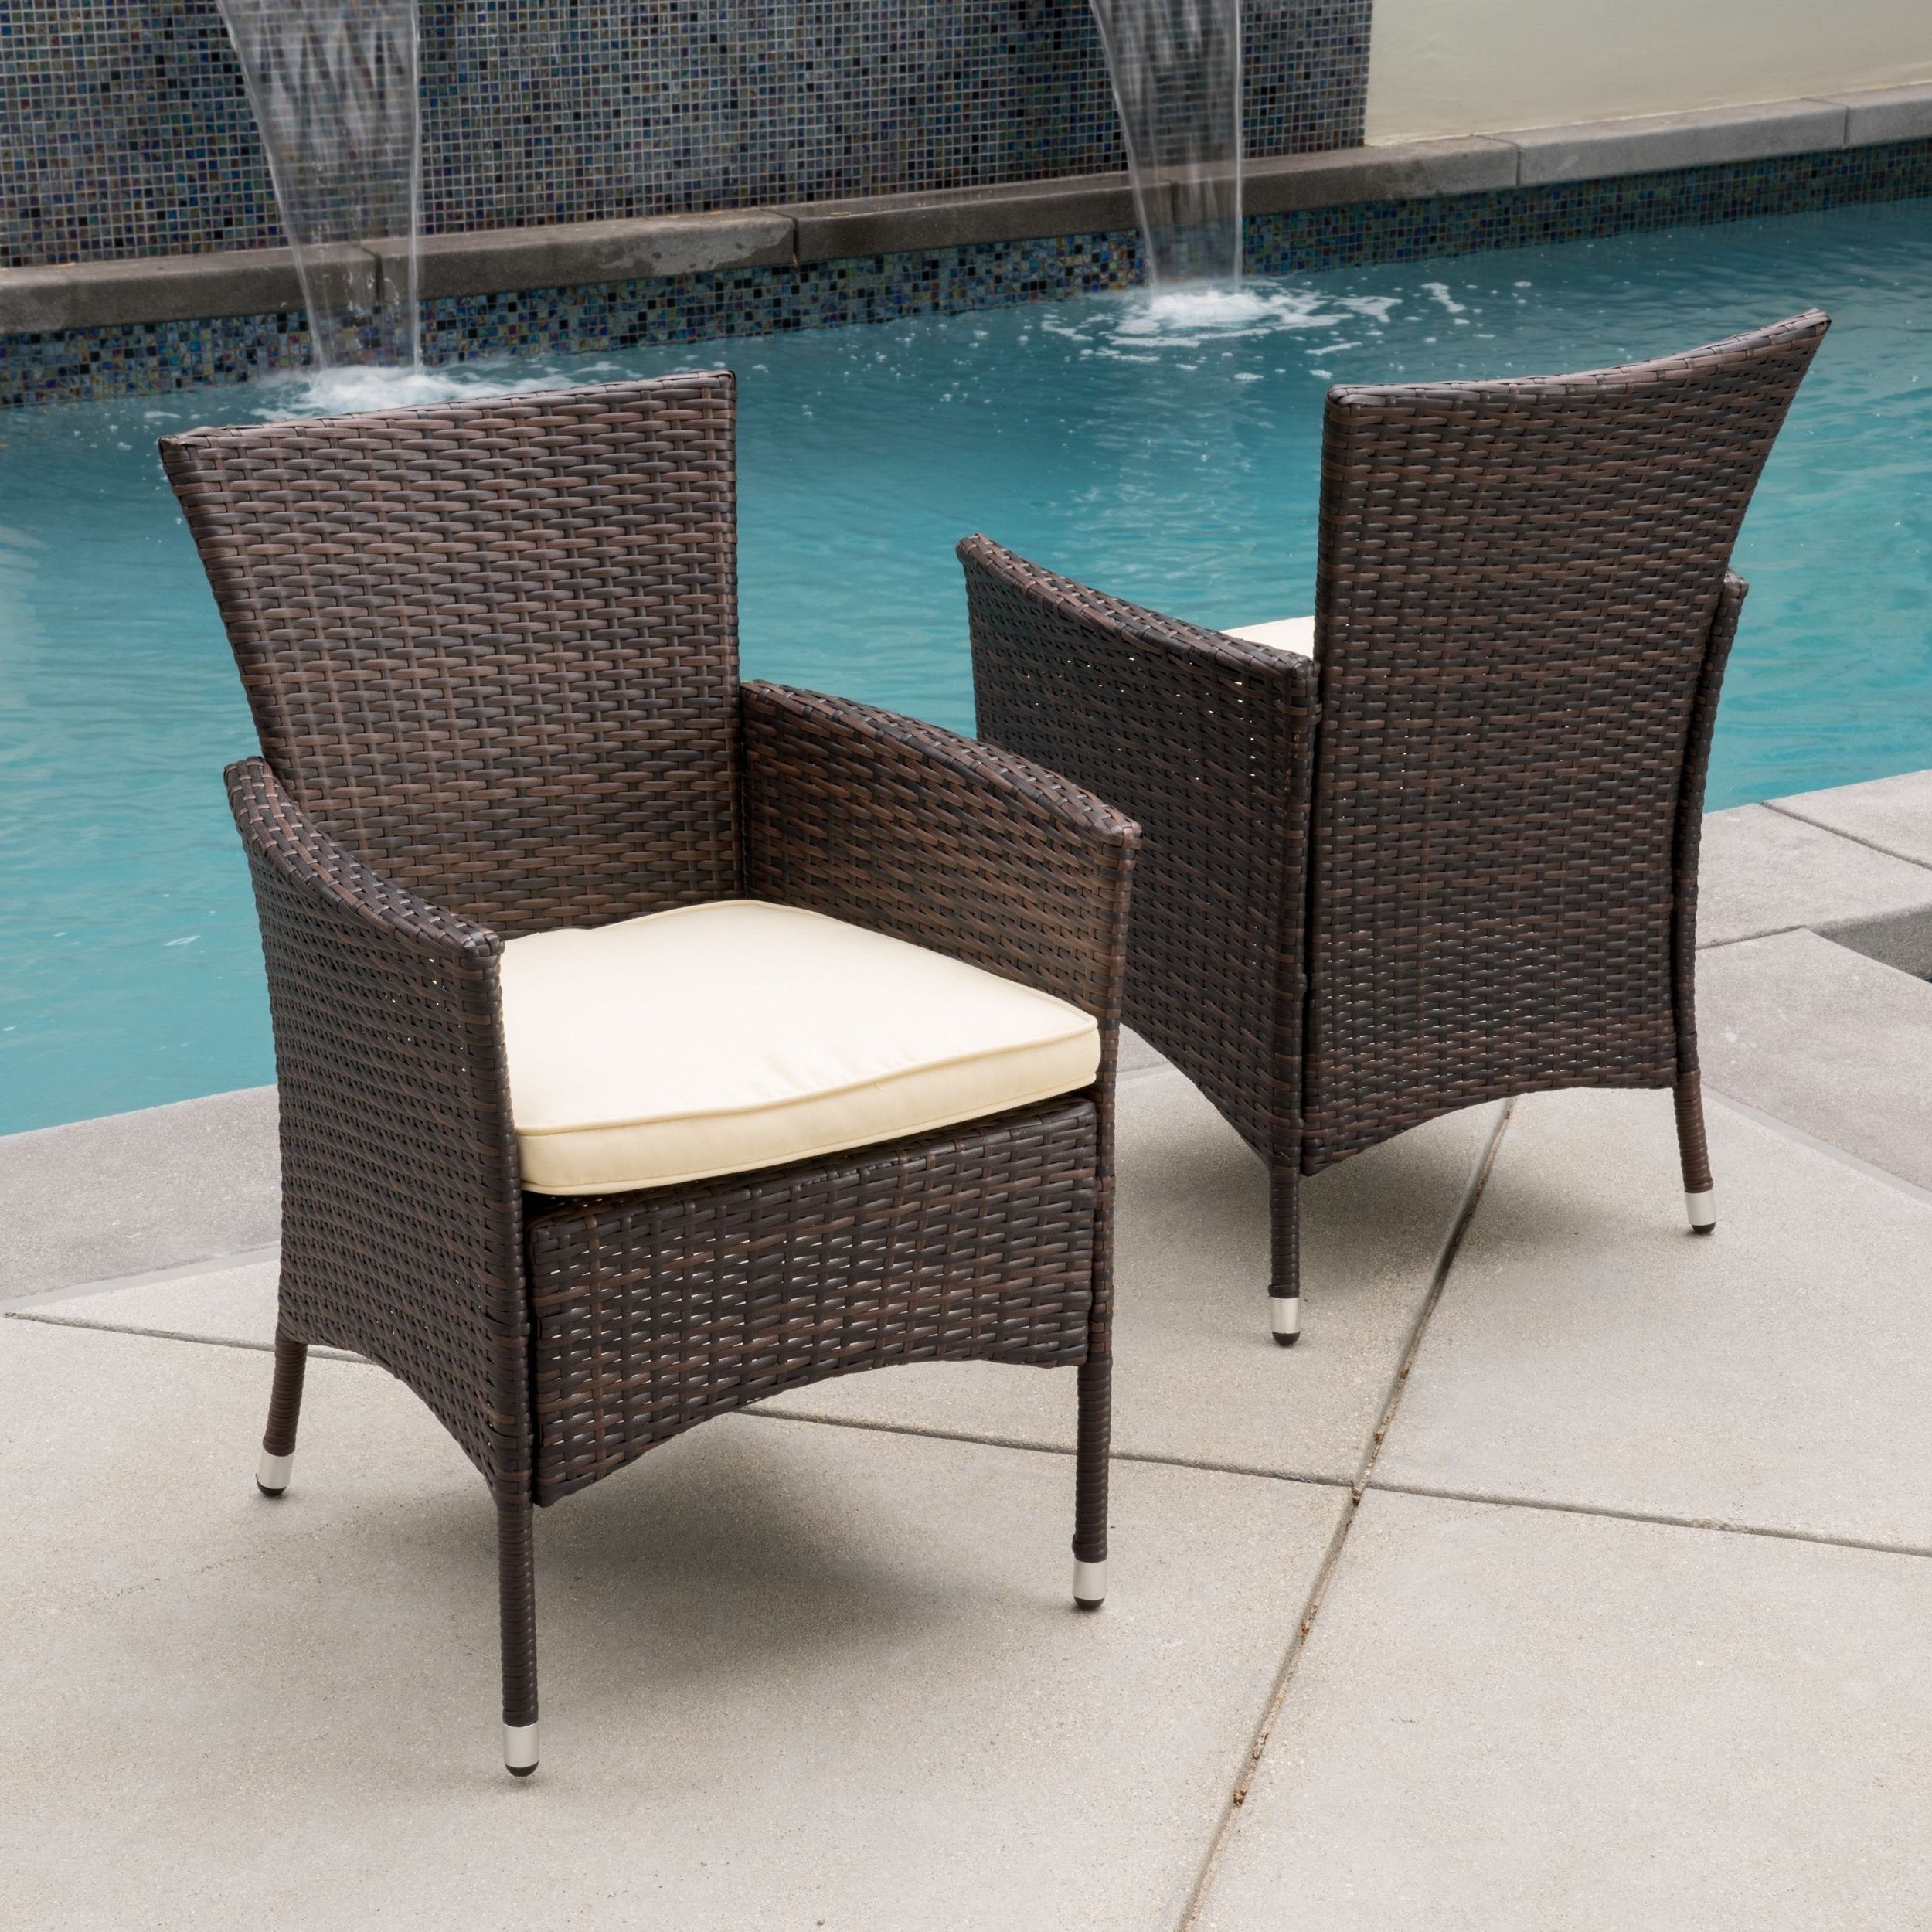 Well Liked Furniture: Modern Pool Decoration With Wicker Hampton Bay Patio In Modern Hampton Bay Outdoor Lighting At Wayfair (View 16 of 20)